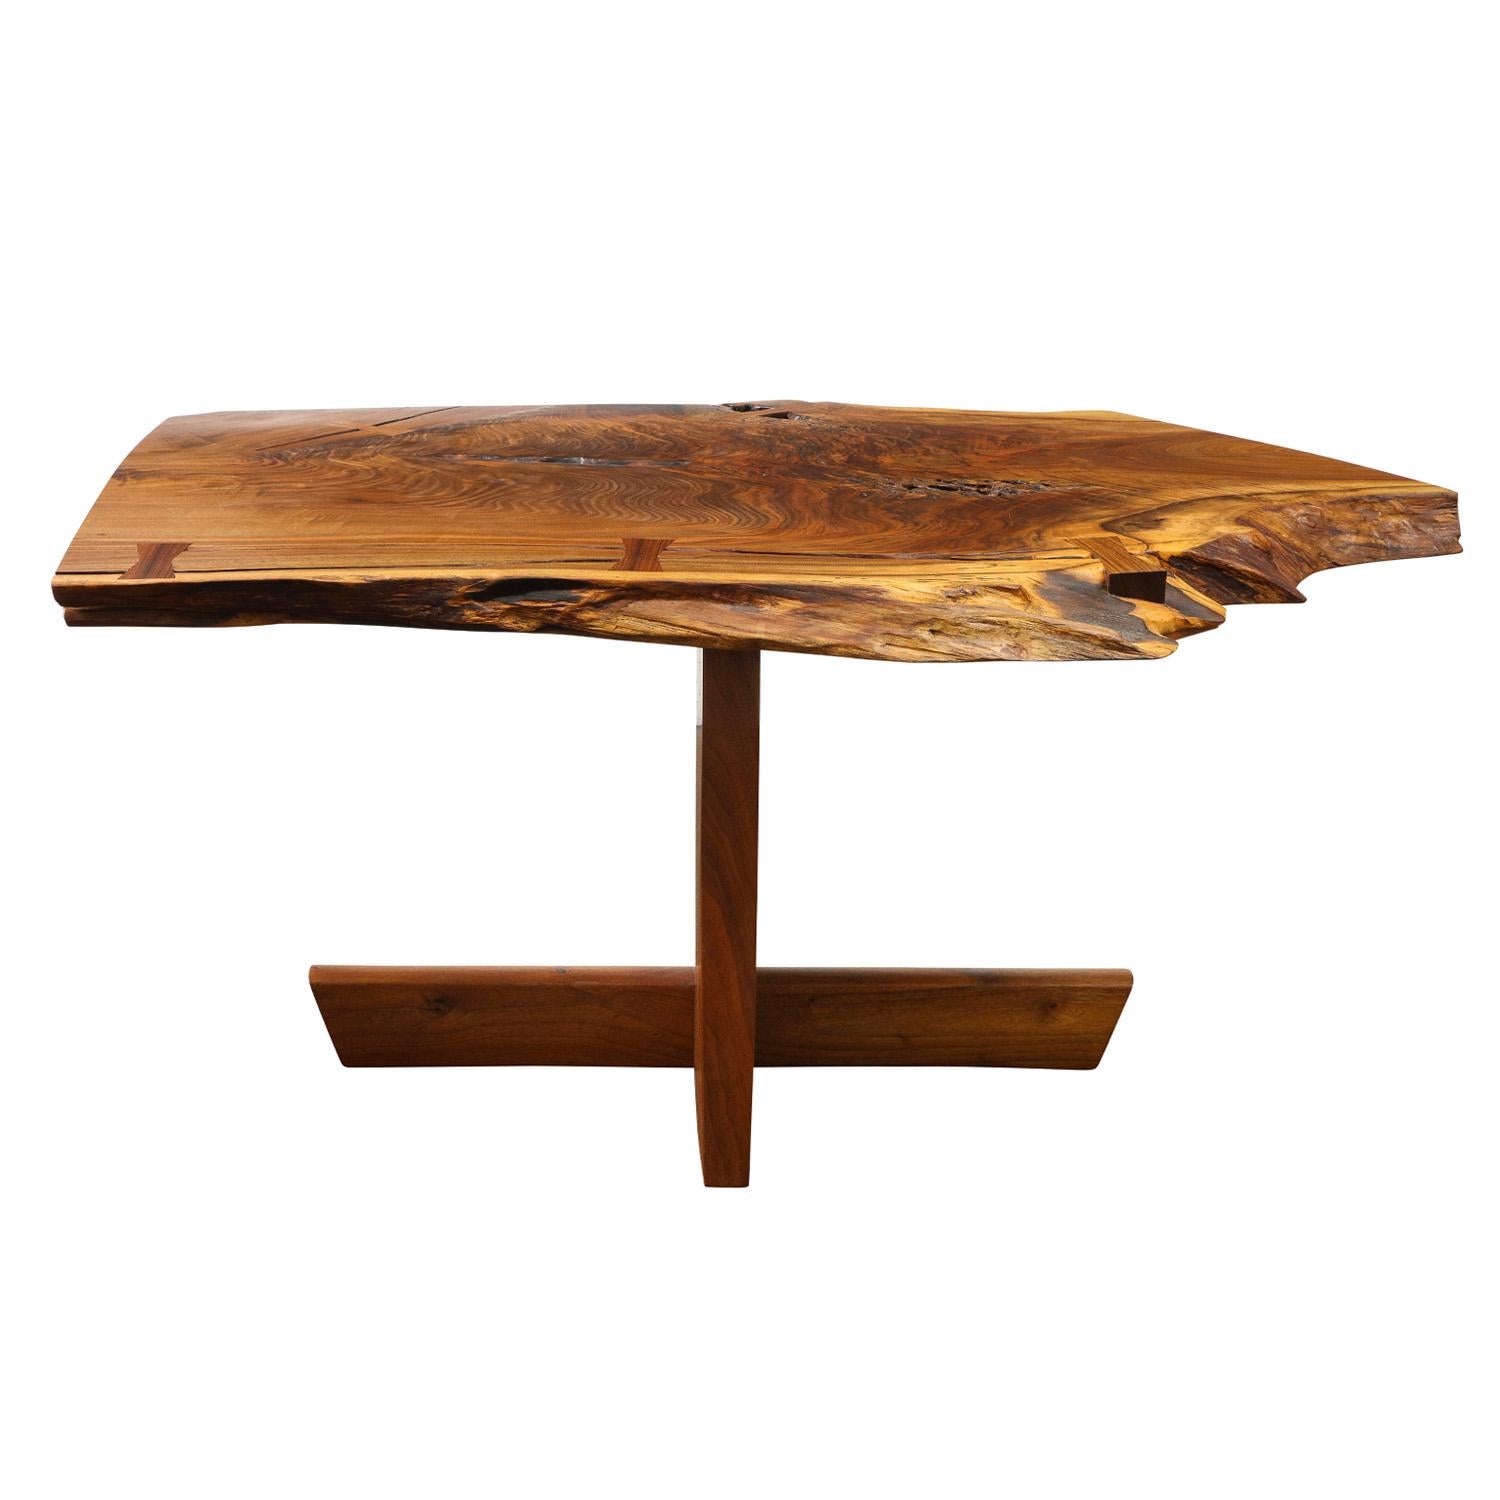 Incredible center/library/hall table with free edge design in black walnut with rosewood butterflies by Mira Nakashima, American 2007 (signed and dated on bottom “Mira Nakashima 8.9.07”). The free edge is on a sap edge and this slab itself is very